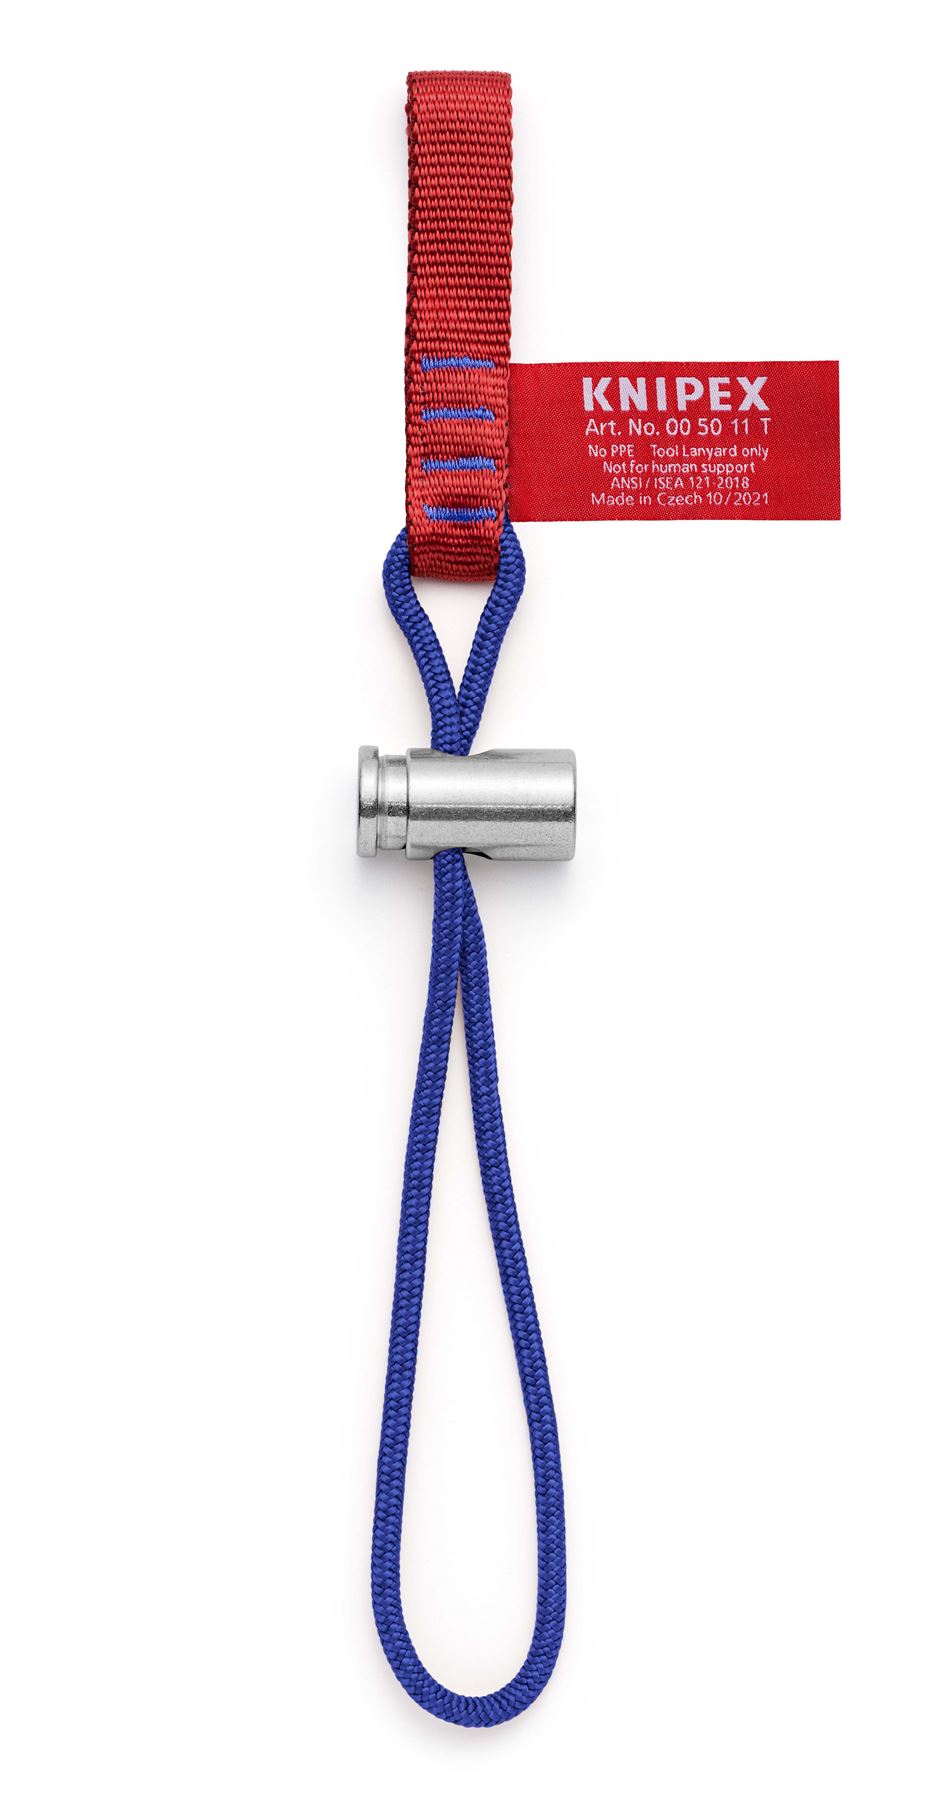 Knipex Adapter Strap for Tethered Tool Range 00 50 11 T BK